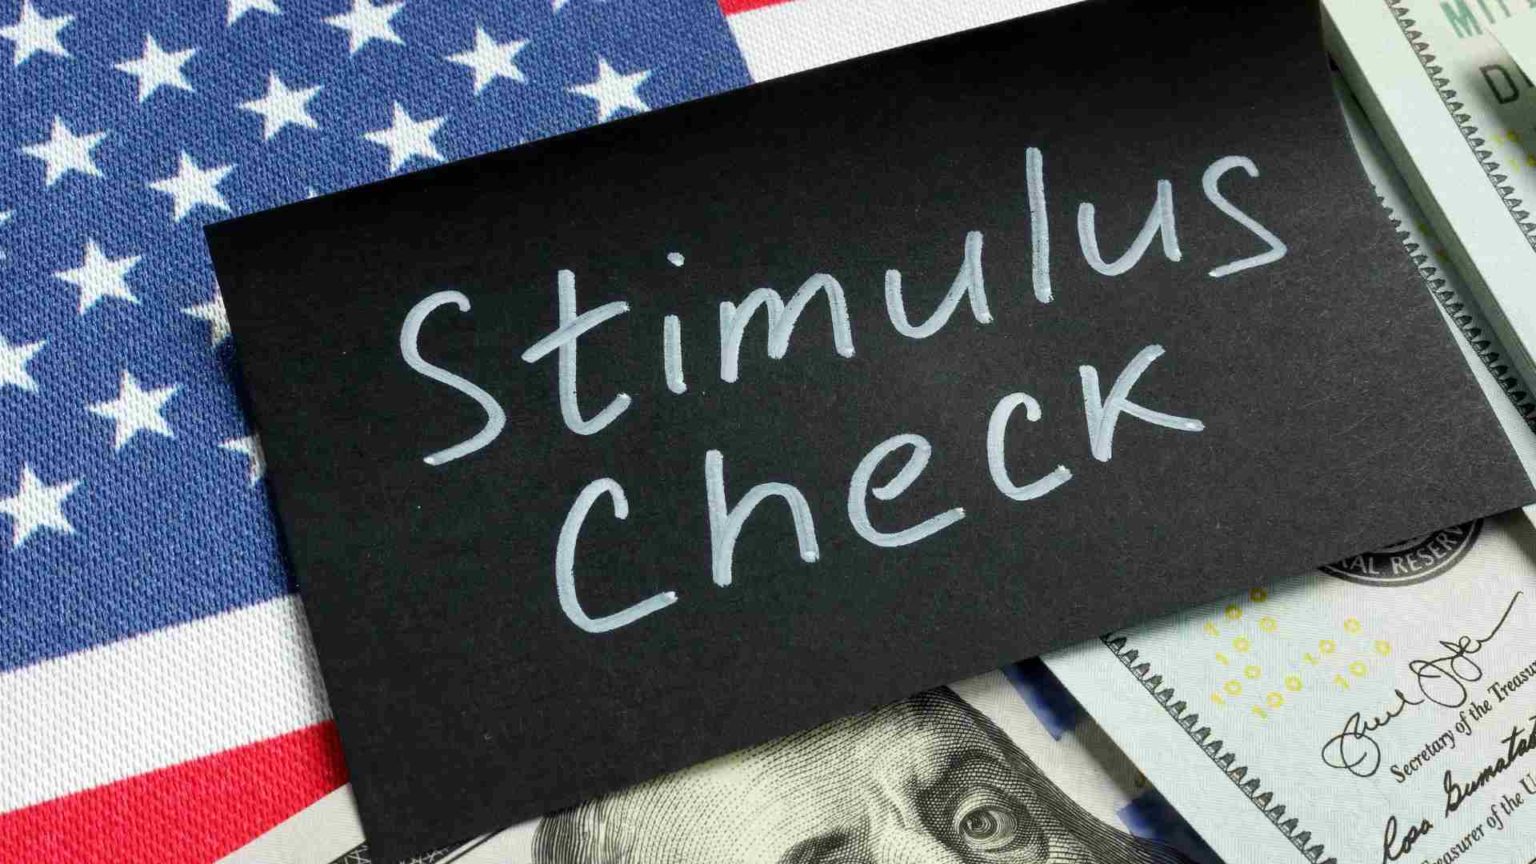 More than 100,000 citizens applied for a stimulus check in this state